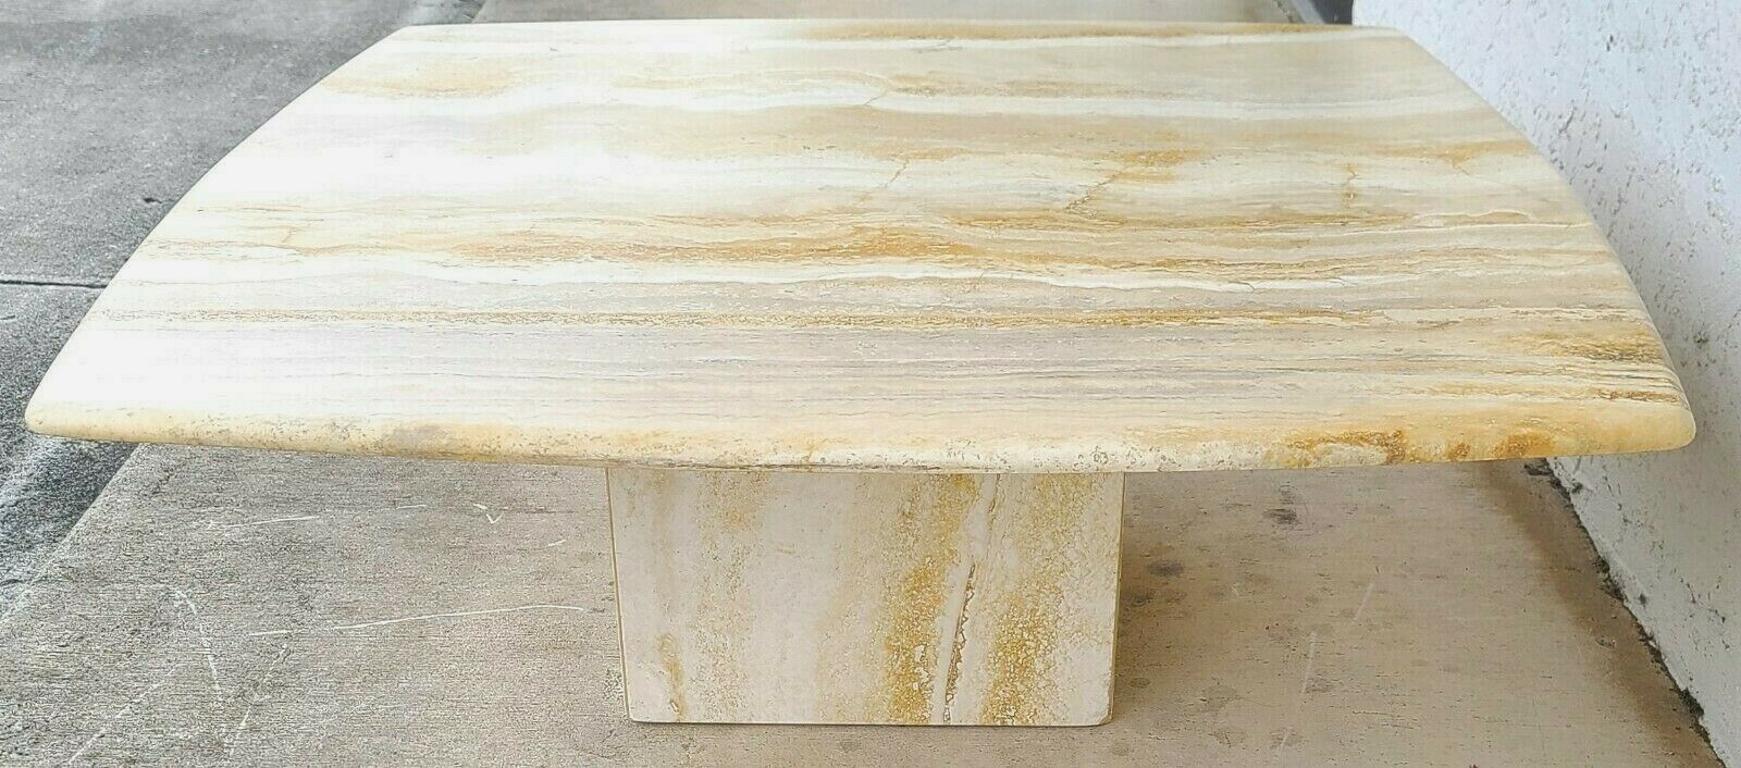 MCM Italian Travertine Marble Cocktail Coffee Table In Good Condition For Sale In Lake Worth, FL